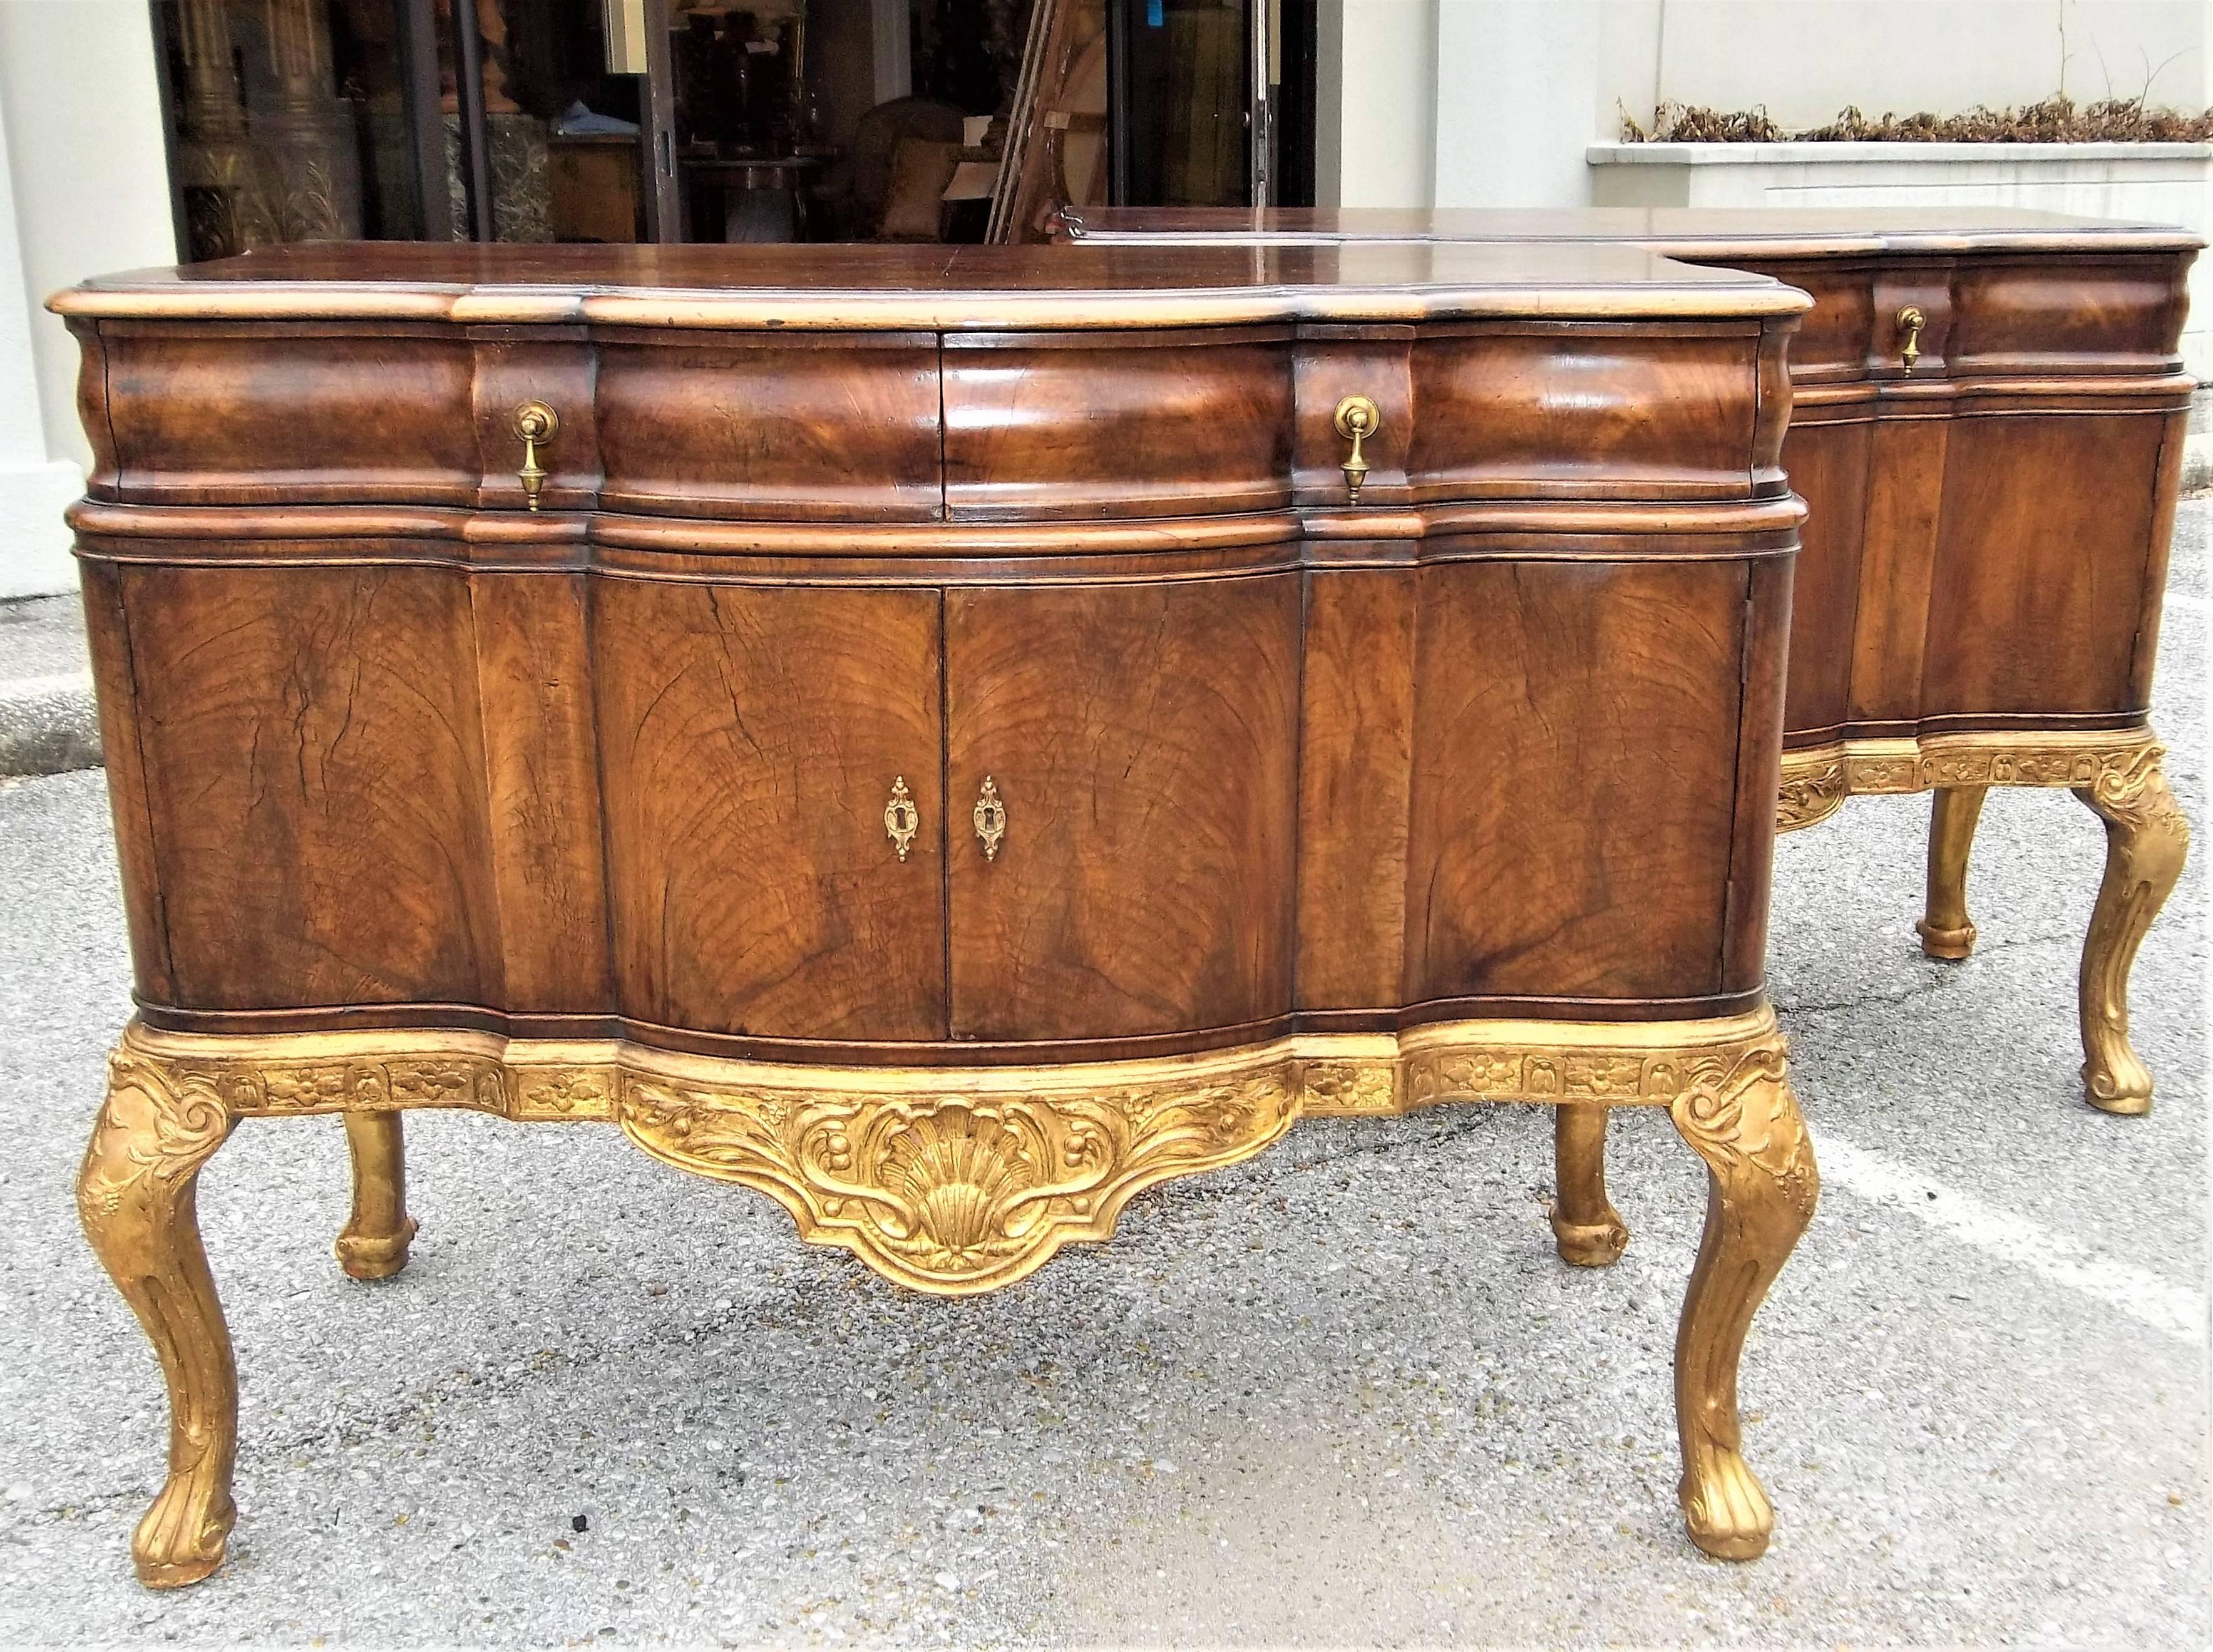 Each commode with two drawers over two doors. Figured walnut over giltwood shell frieze .Warm Cognac colored walnut. Very pretty patina. Nicely aged gilding. One key (unlocks / locks both sets of cabinet doors). Original hardware. Late